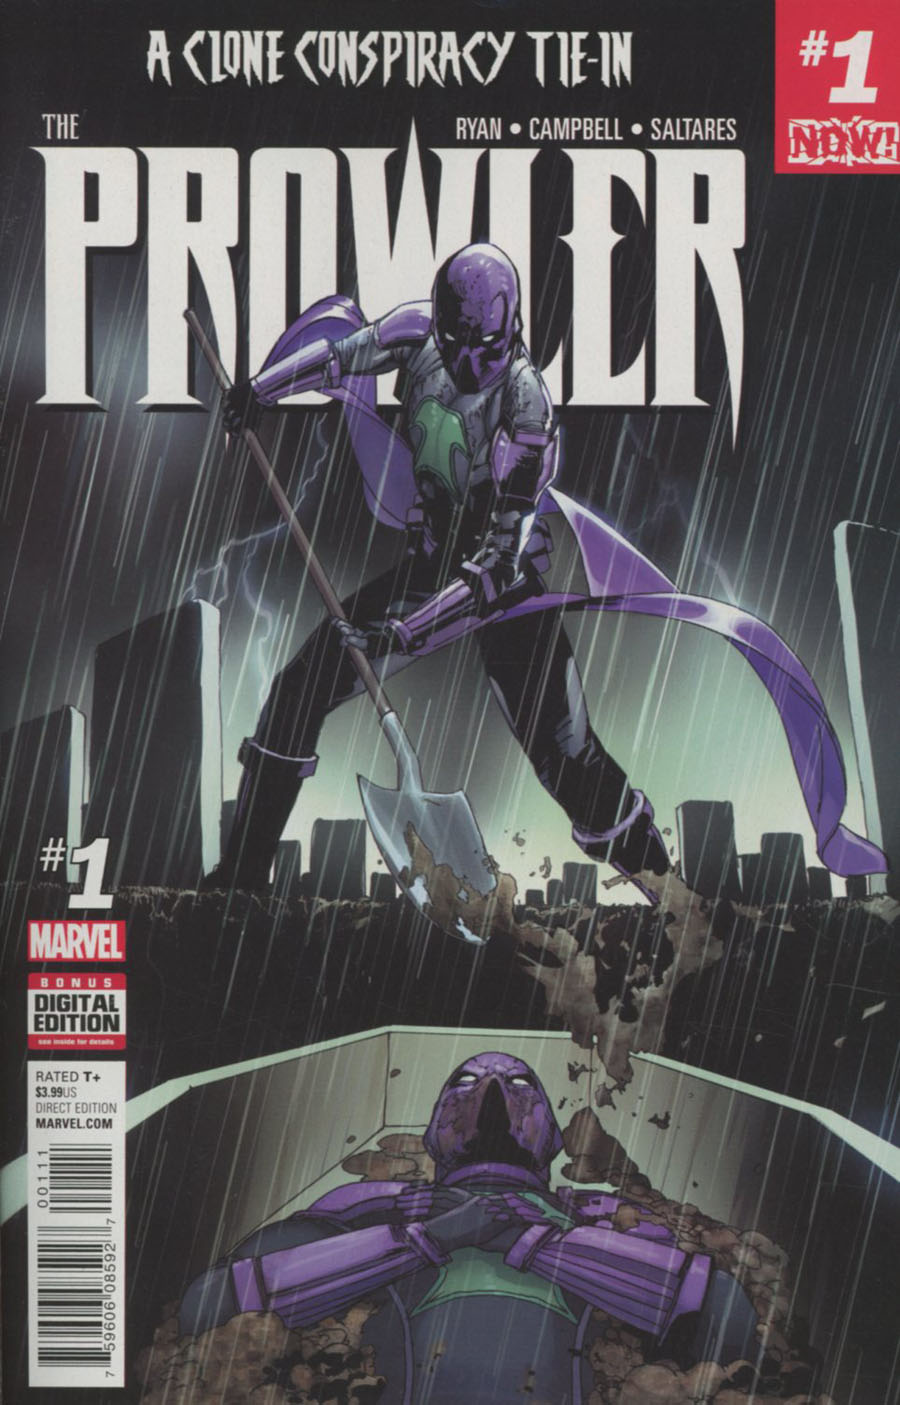 Prowler (Marvel) Vol 2 #1 Cover A 1st Ptg Regular Travel Foreman Cover (Clone Conspiracy Tie-In)